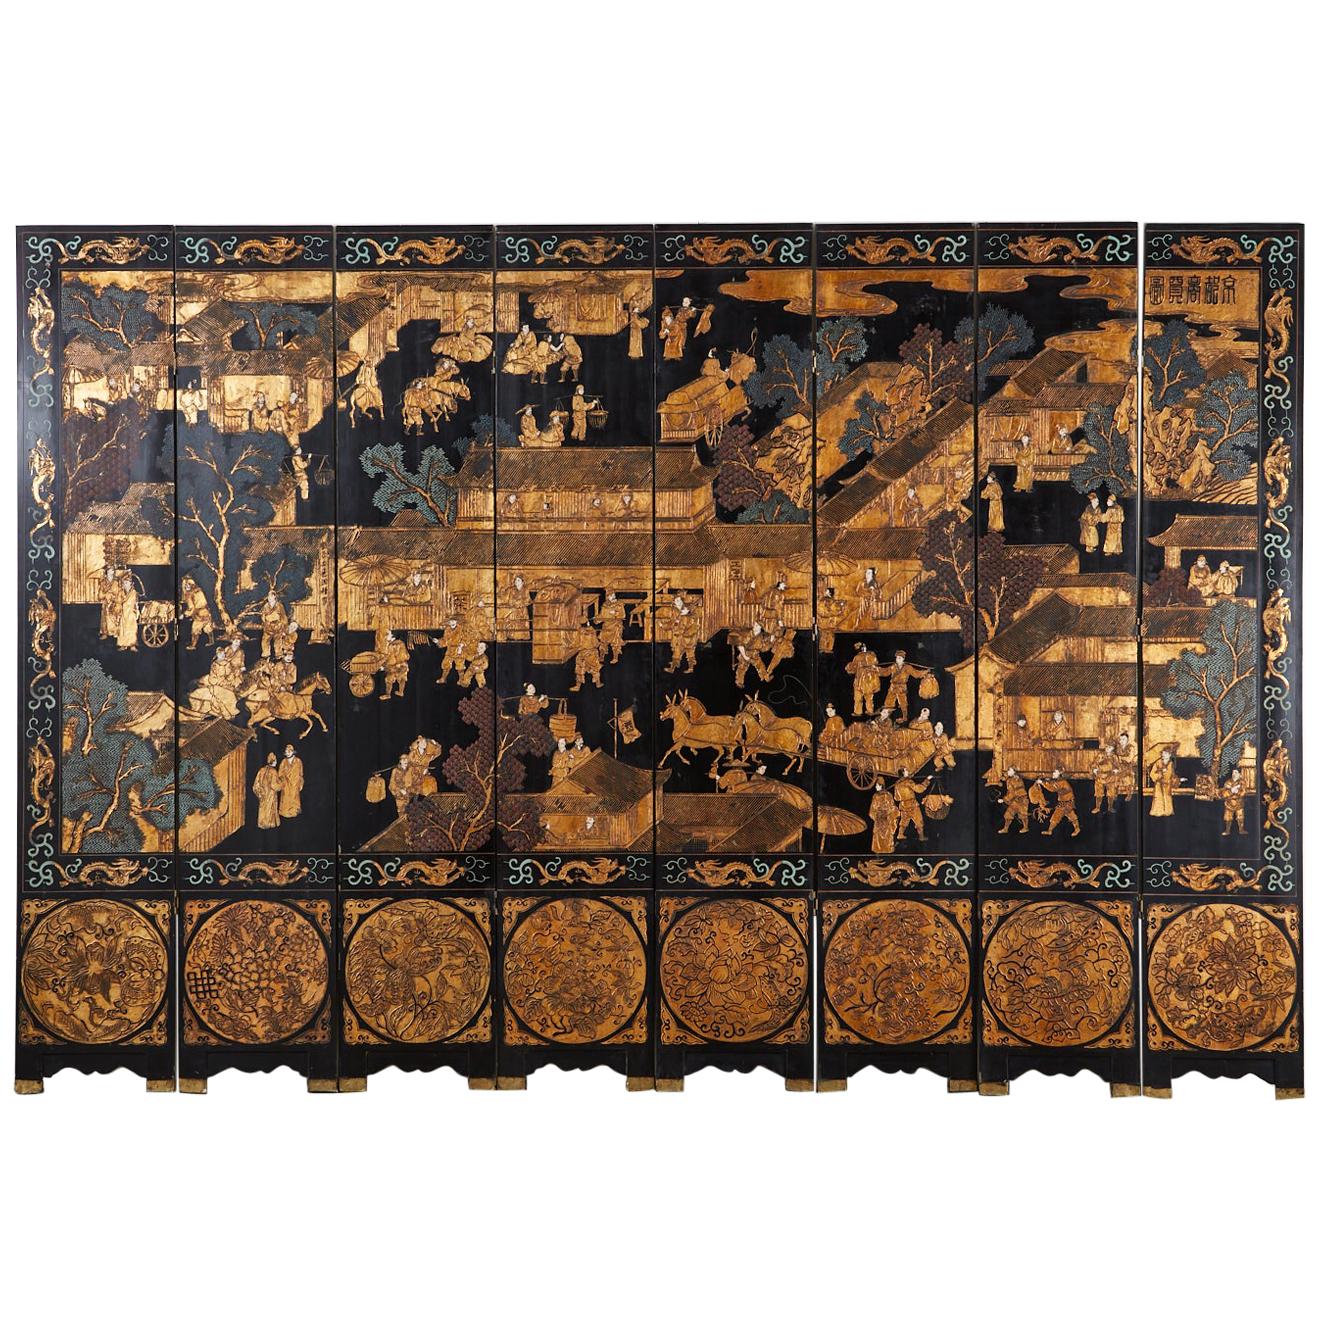 Fantastic Chinese export eight-panel Coromandel screen featuring a busy Chinese village. Black lacquer on wood core panels with Kuancai carved scenes filled with color pigments and gilt. The intricately carved screen depicts figures with animals in